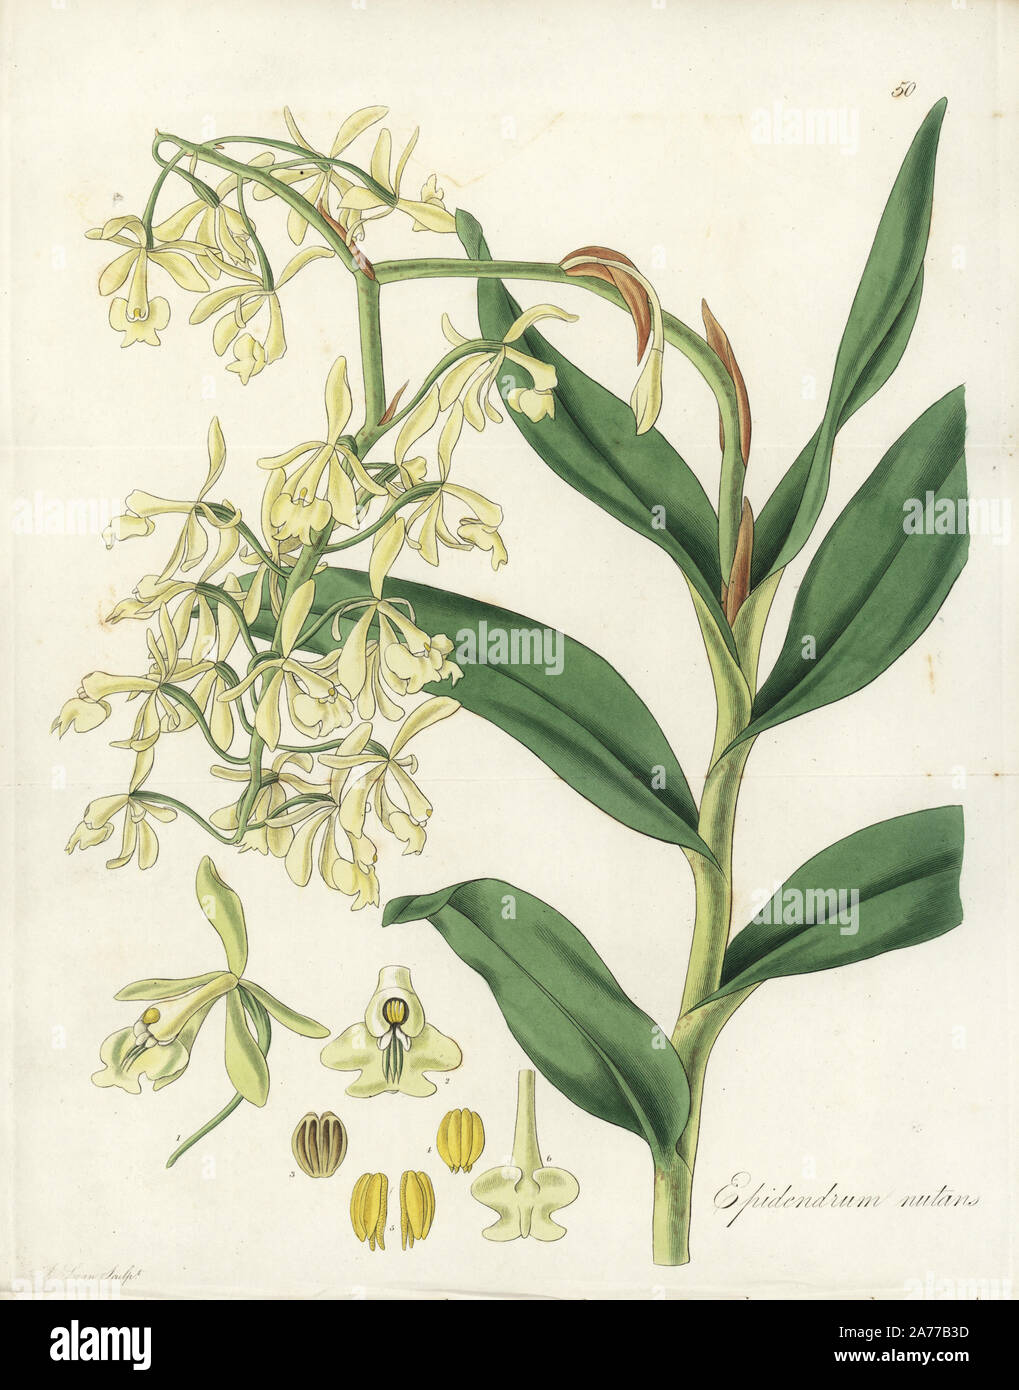 Nodding epidendrum orchid, Epidendrum nutans (Drooping-flowered epidendrum). Handcoloured copperplate engraving by J. Swan after a botanical illustration by William Jackson Hooker from his own 'Exotic Flora,' Blackwood, Edinburgh, 1823. Hooker (1785-1865) was an English botanist who specialized in orchids and ferns, and was director of the Royal Botanical Gardens at Kew from 1841. Stock Photo